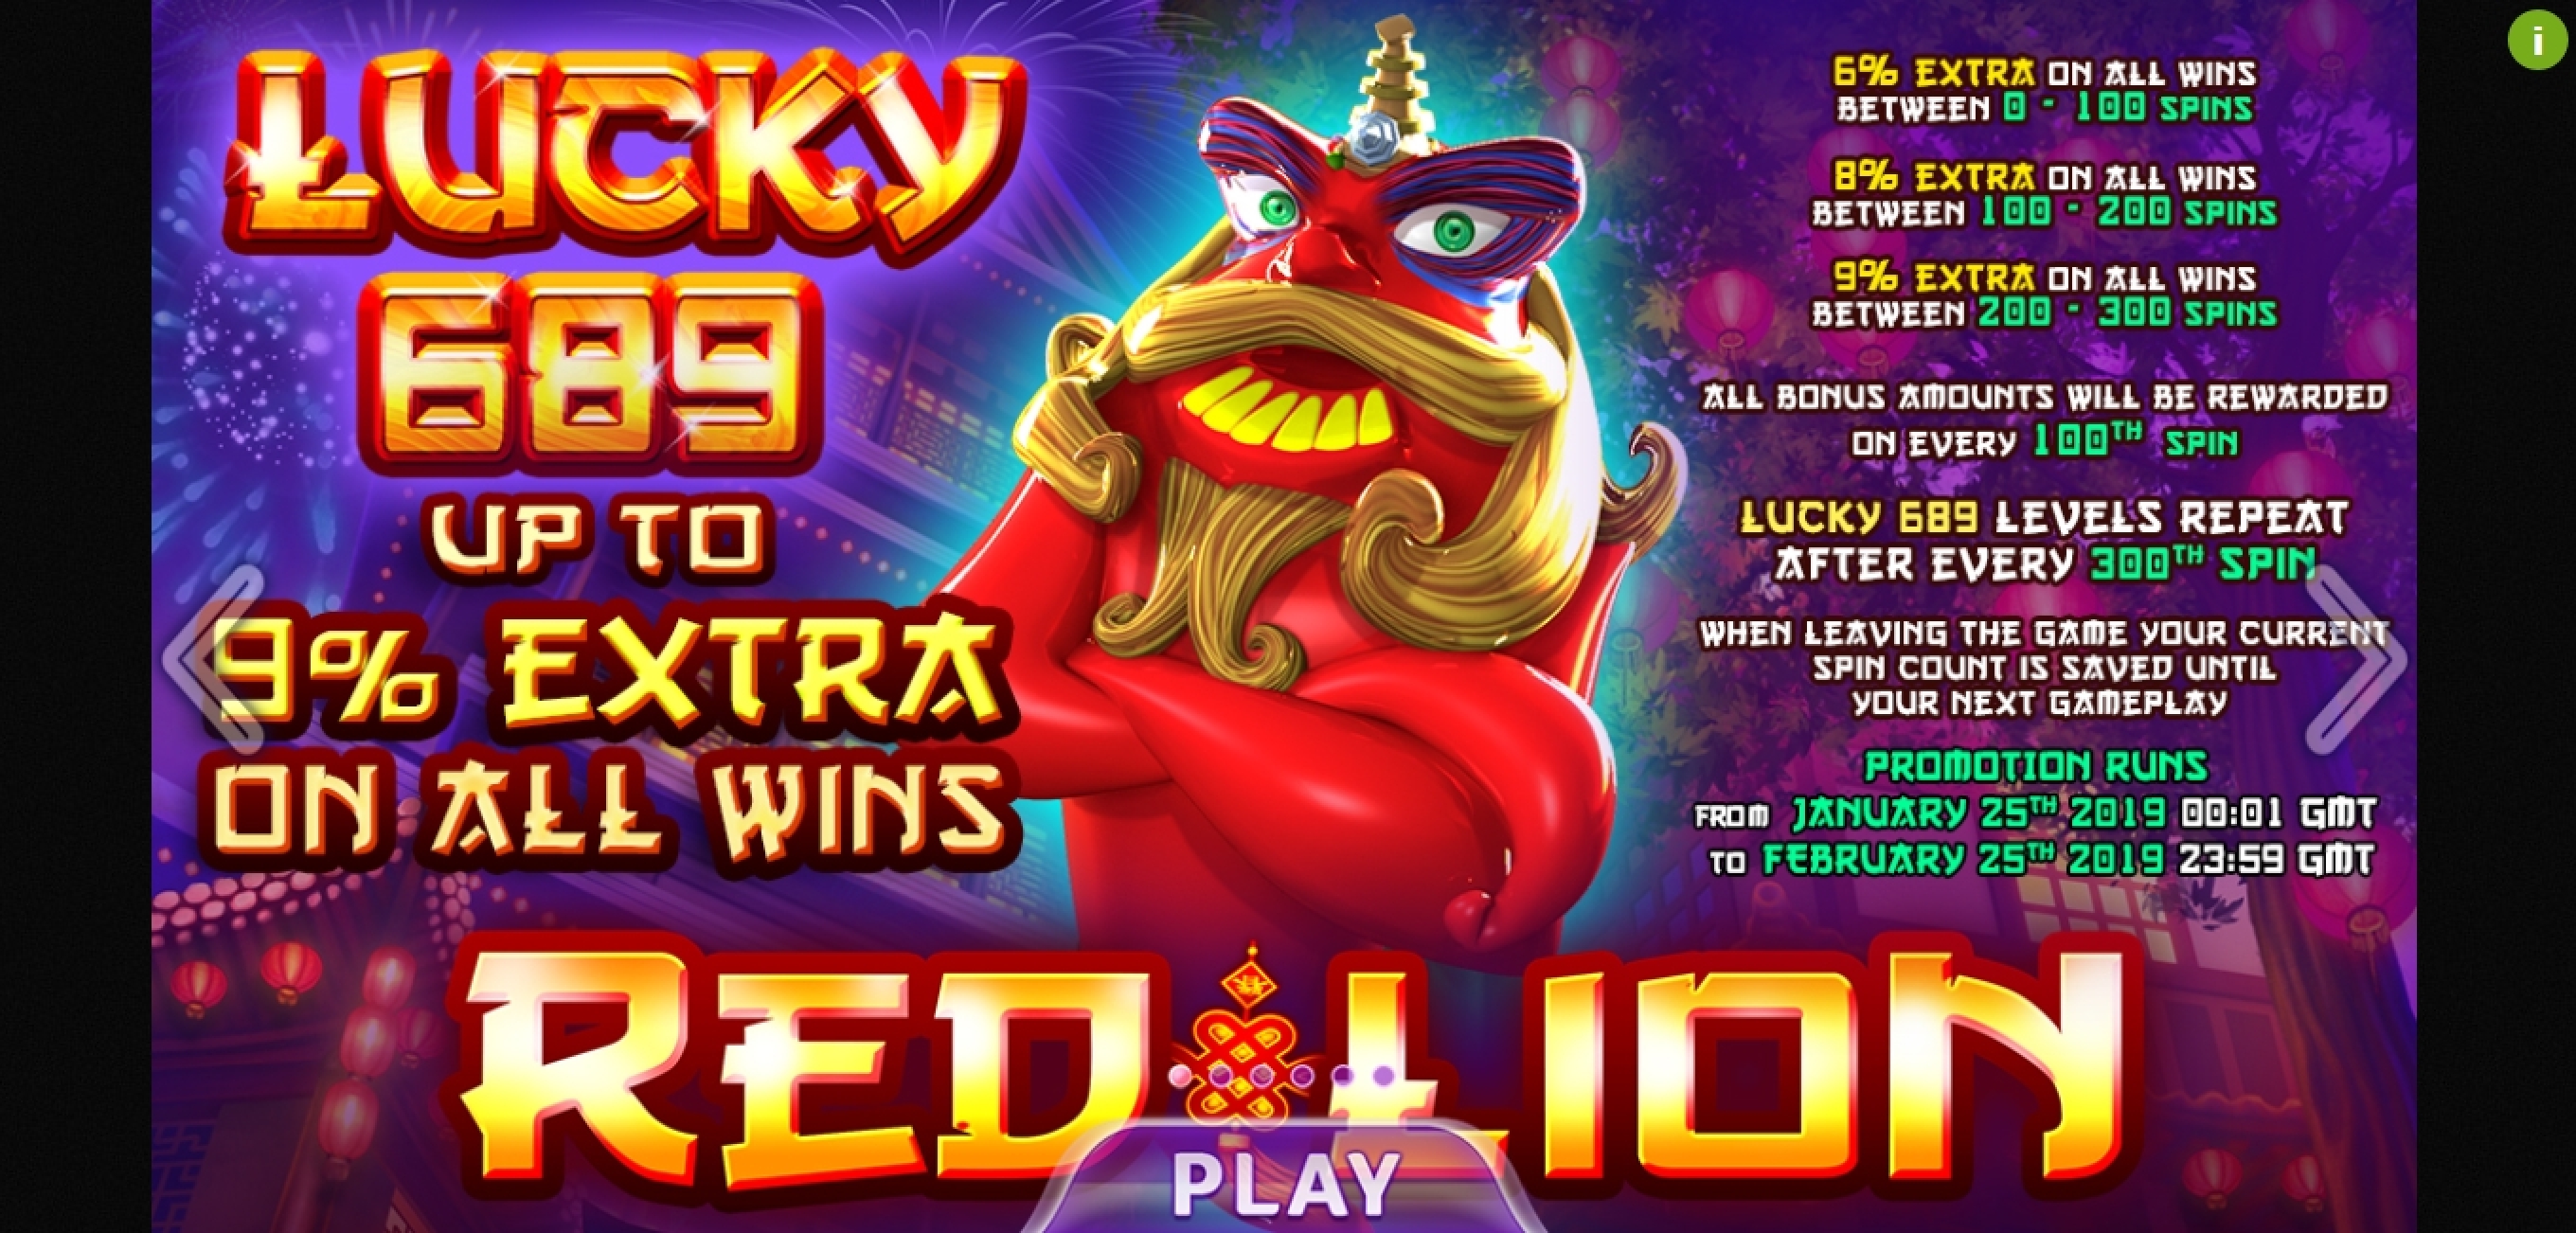 Play Red Lion Free Casino Slot Game by Felix Gaming